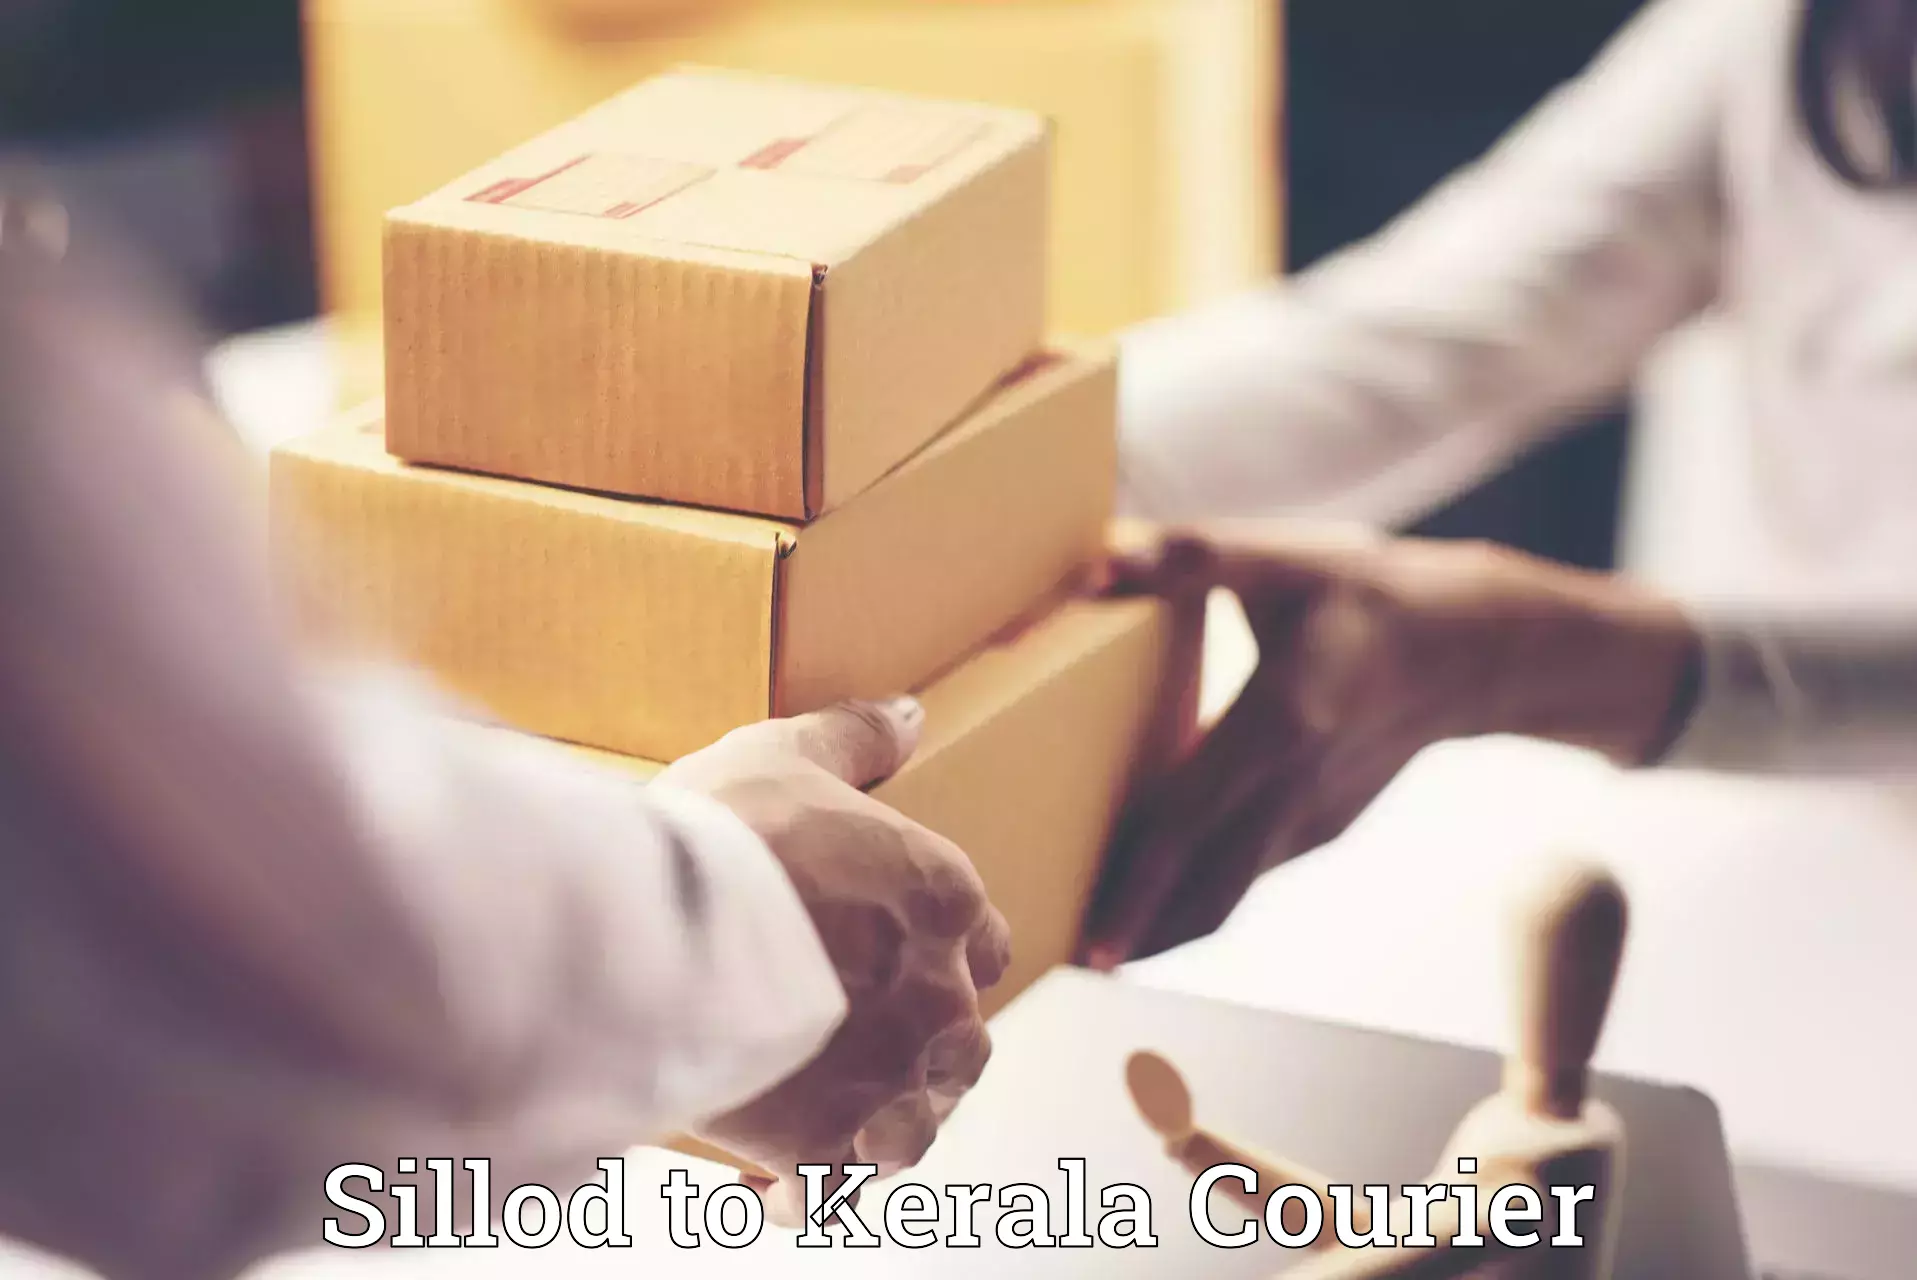 Door to door luggage delivery Sillod to Cochin Port Kochi